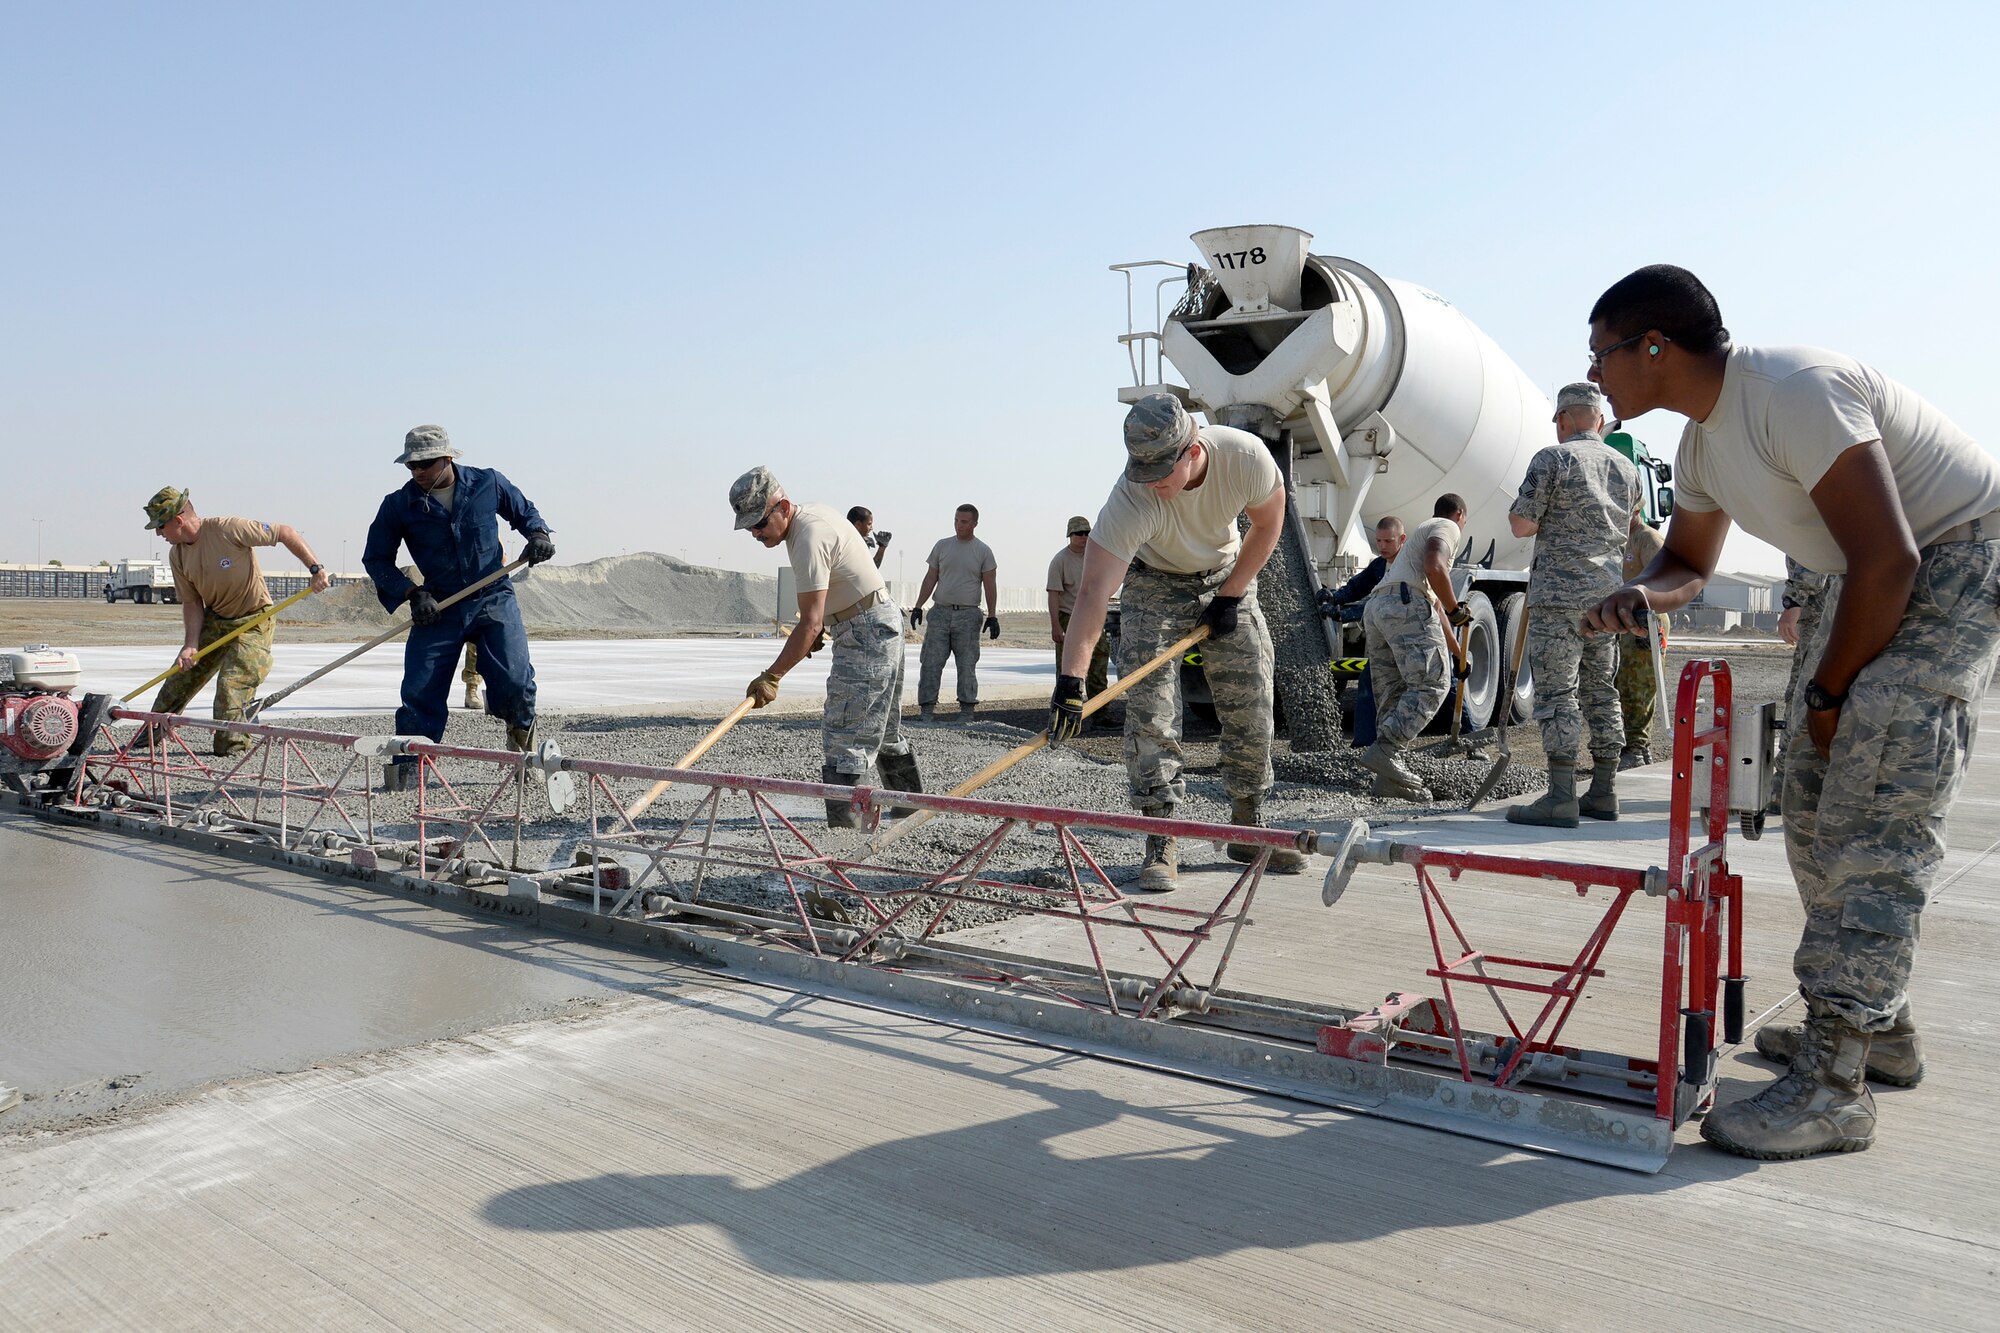 Airmen with the Expeditionary Civil Engineer Squadron work side-by-side with Australians from the Royal Australian Air Force Air Task Group to lay concrete at the new Australian beddown site at an undisclosed location in Southwest Asia Oct. 30, 2014. Approximately nine members of the RAAF Air Task Group integrated with Airmen in the ECES where they were able to learn different styles of training. (U.S. Air Force photo/Tech. Sgt. Marie Brown)